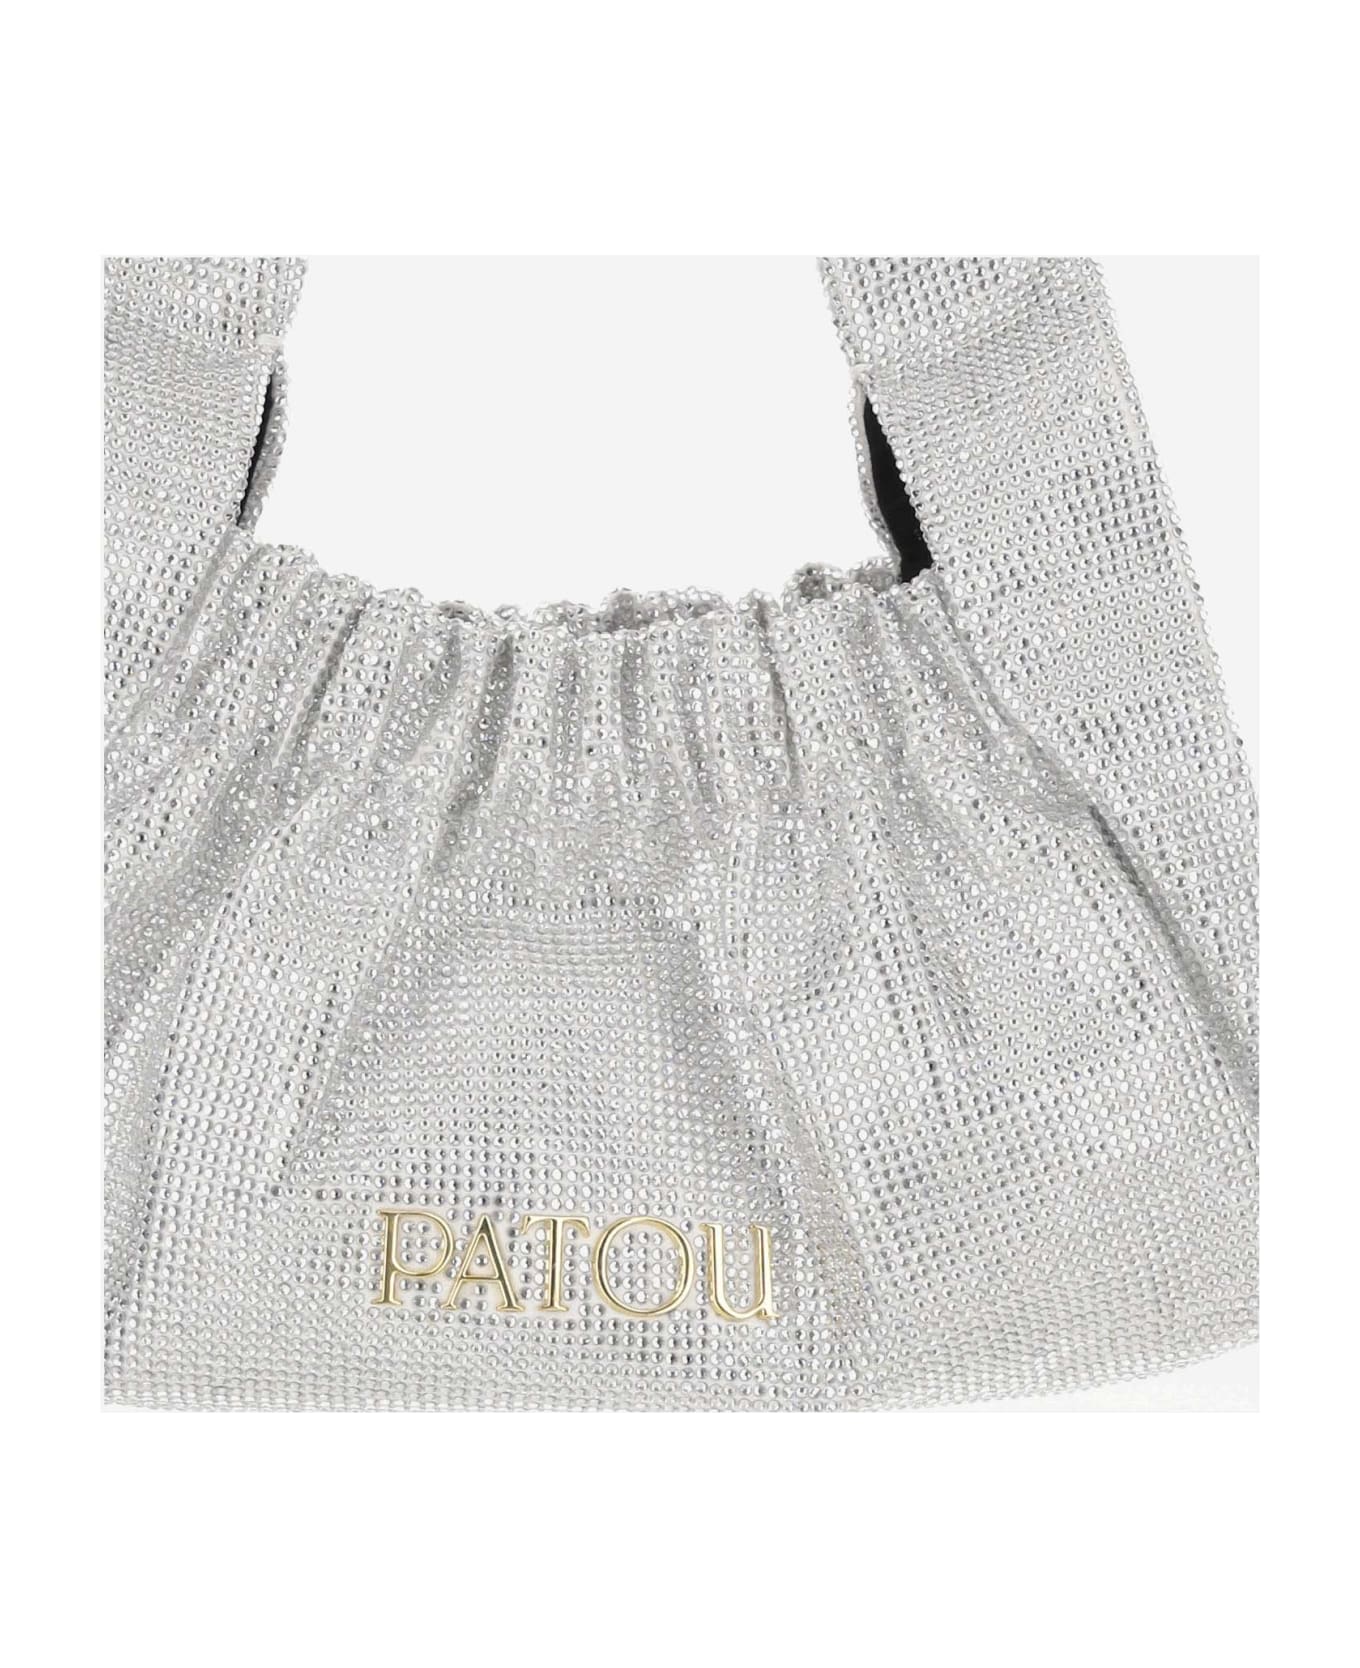 Patou Le Biscuit Satin And Rhinestone Bag - White トートバッグ